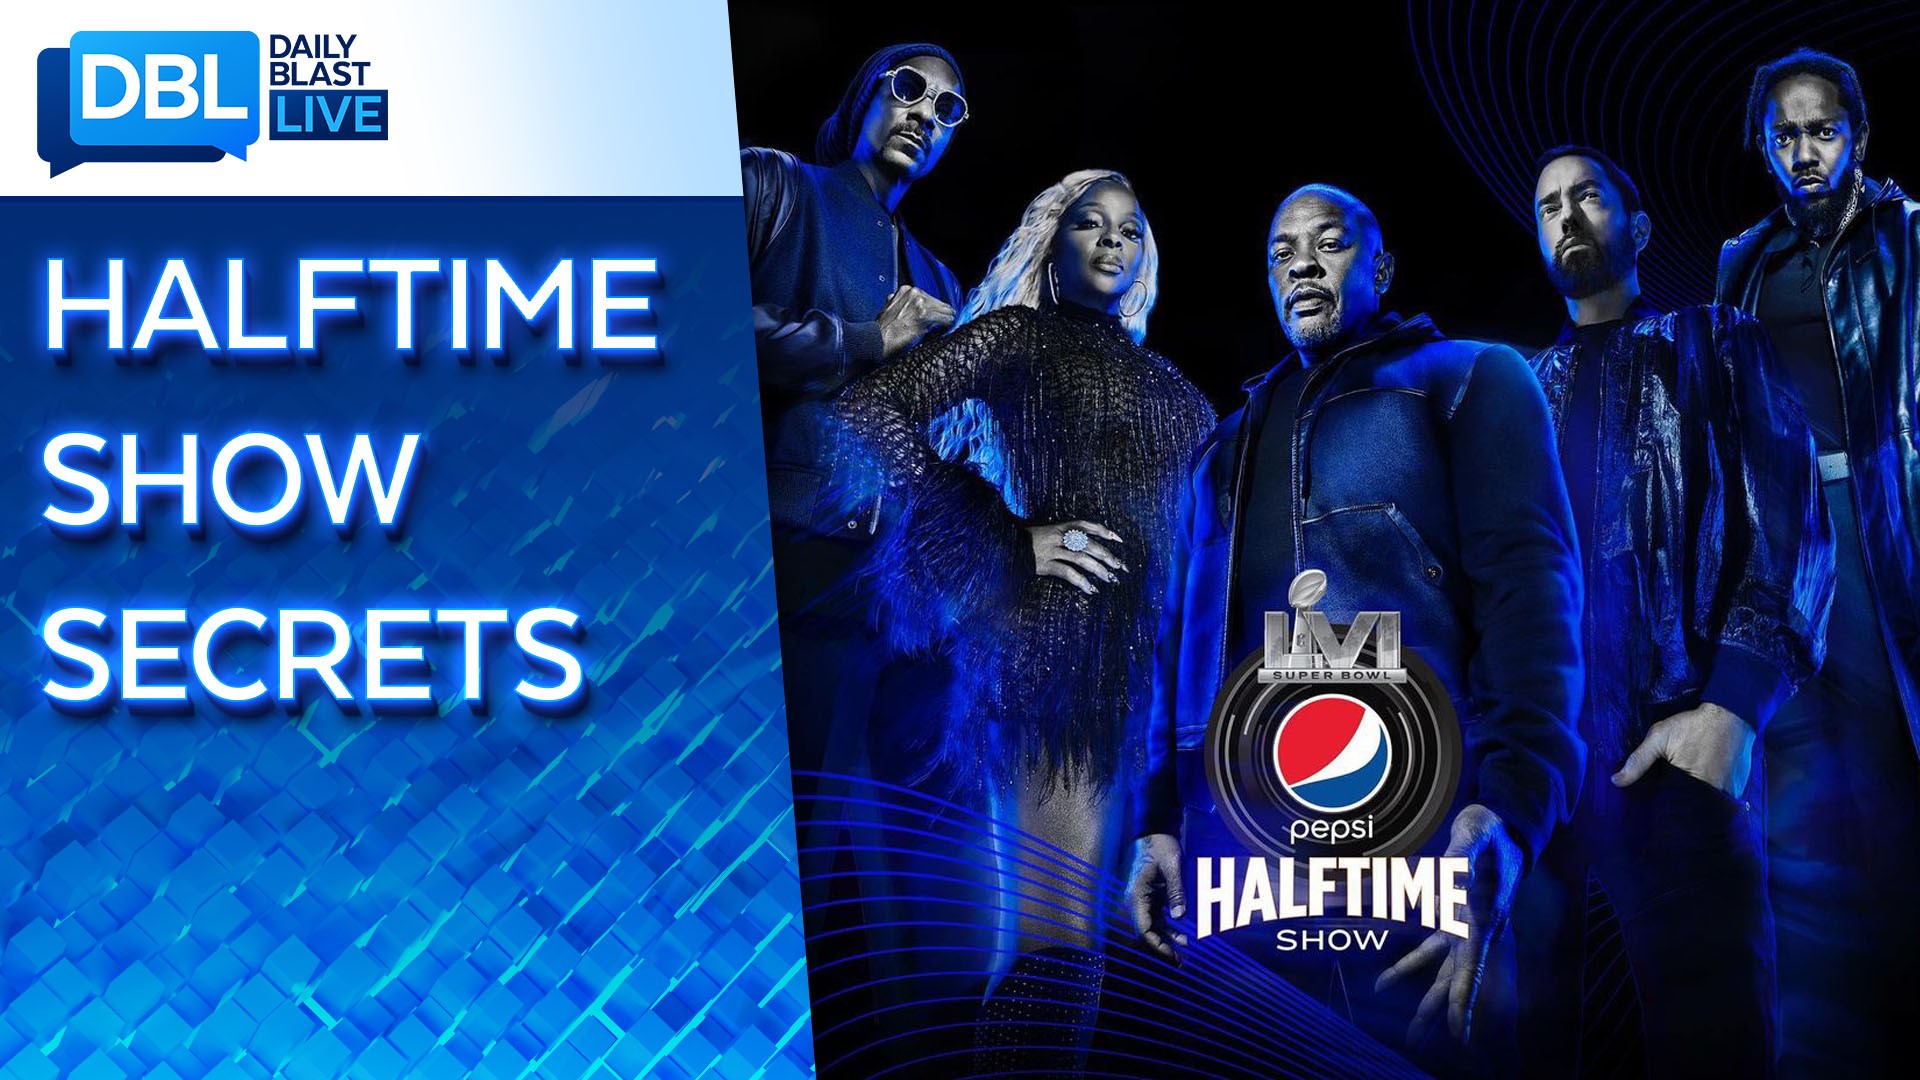 Officials are reportedly going to great lengths to keep Sunday's halftime show under wraps. What surprises could be in store? The DBL panel discusses.